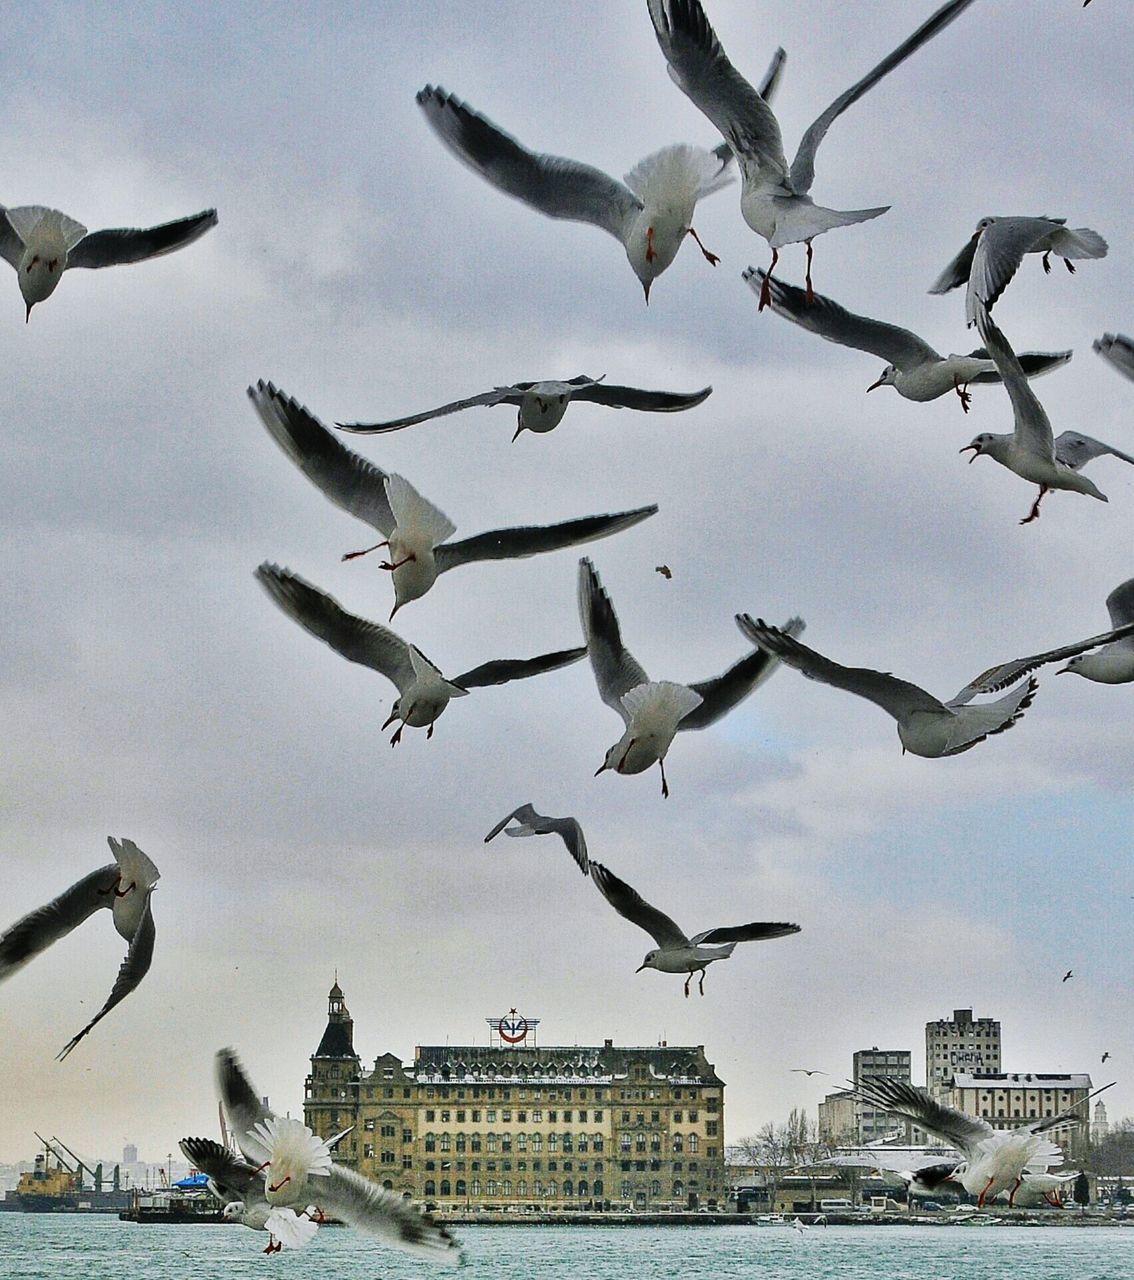 bird, flying, animals in the wild, animal themes, spread wings, wildlife, seagull, architecture, water, building exterior, built structure, mid-air, sky, city, waterfront, sea, flock of birds, river, medium group of animals